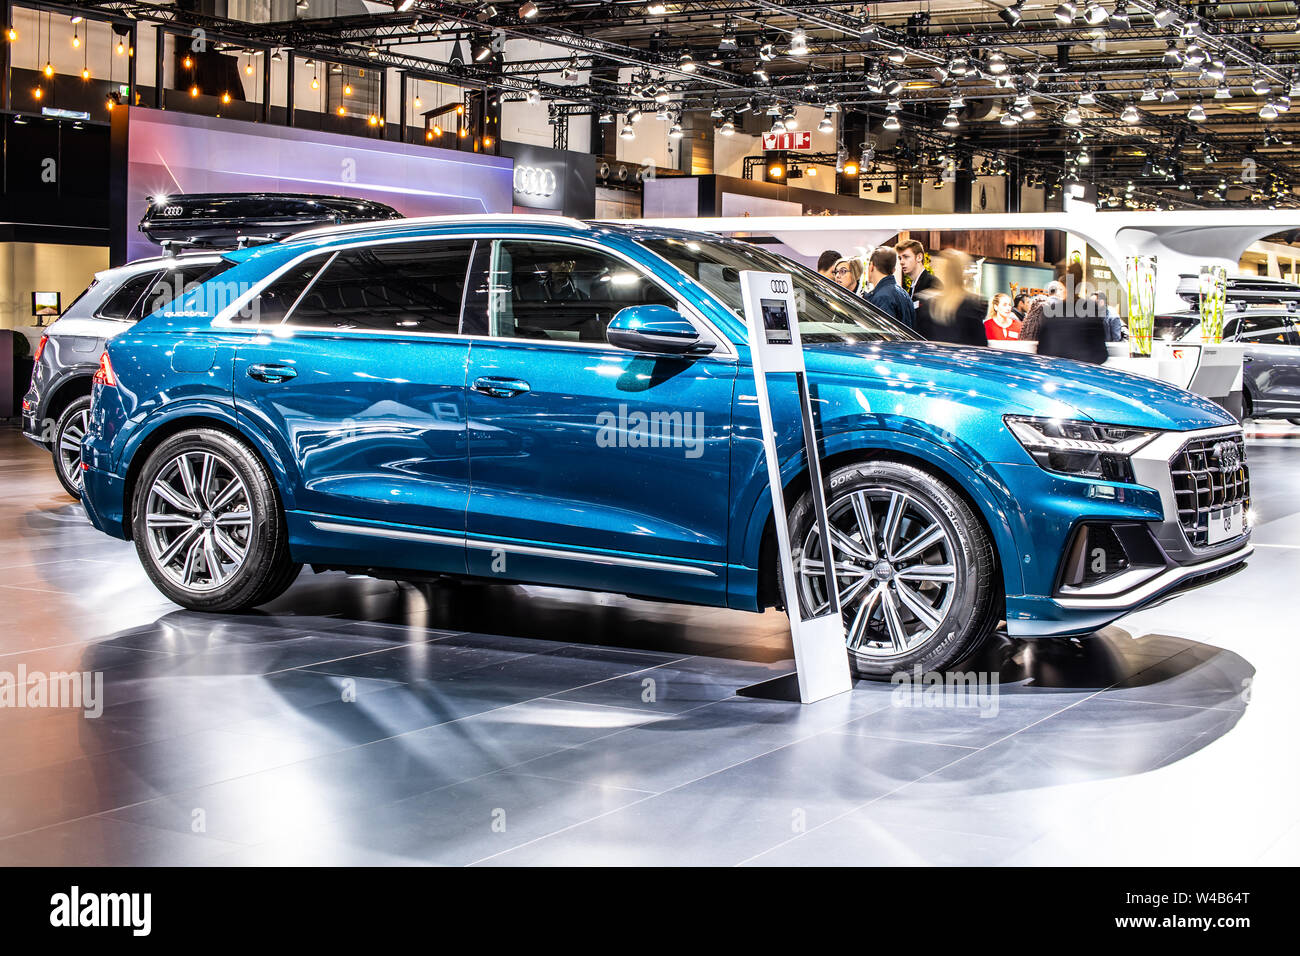 Brussels, Belgium, Jan 2019: metallic blue all new Audi Q8 at Brussels Motor Show, 1st gen, SUV produced by German automobile manufacturer Audi AG Stock Photo